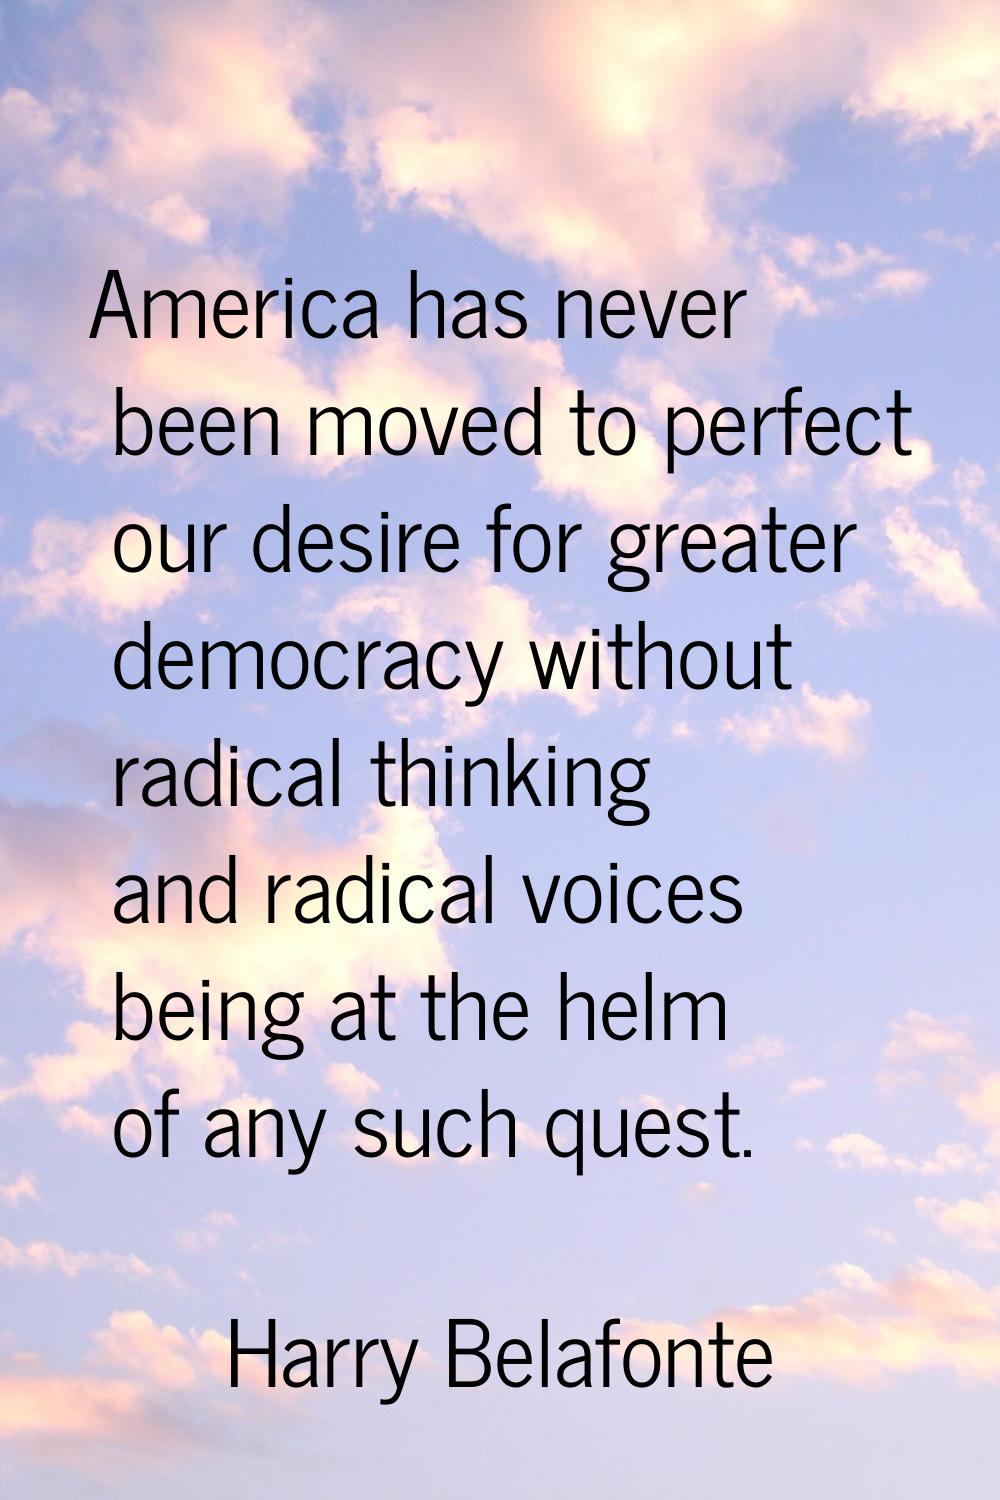 America has never been moved to perfect our desire for greater democracy without radical thinking a